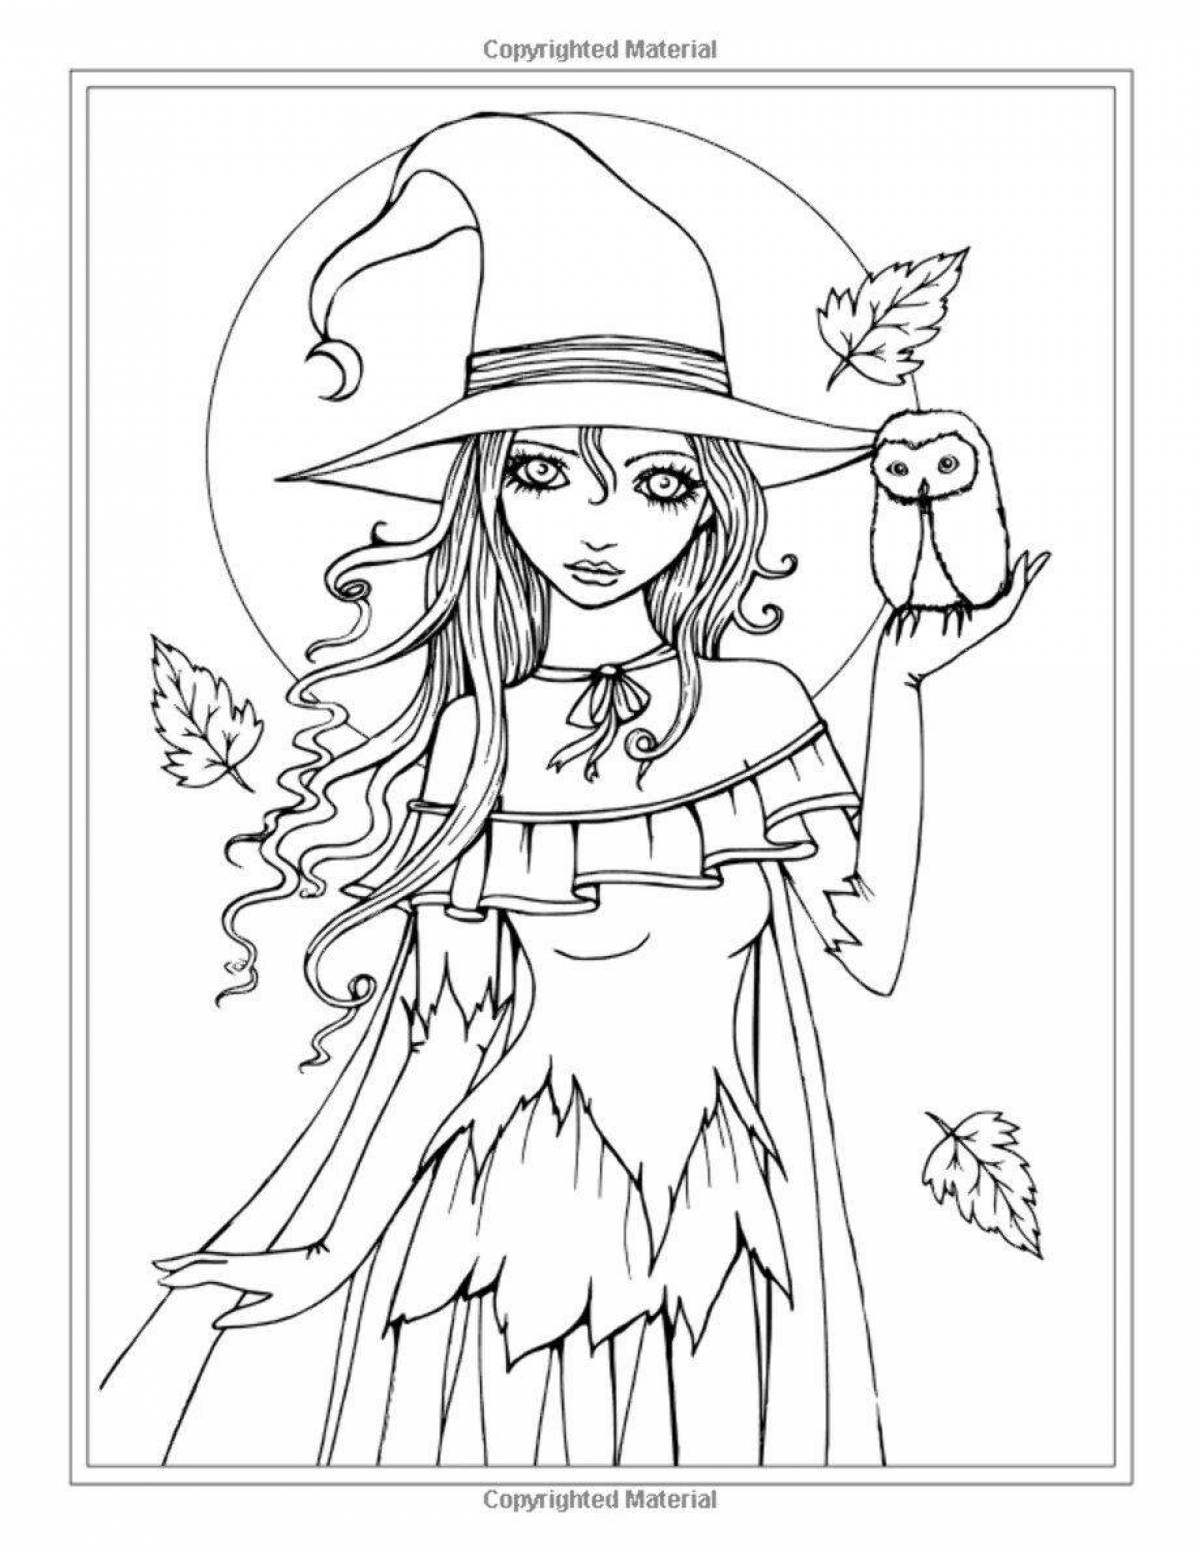 Charming witch coloring book